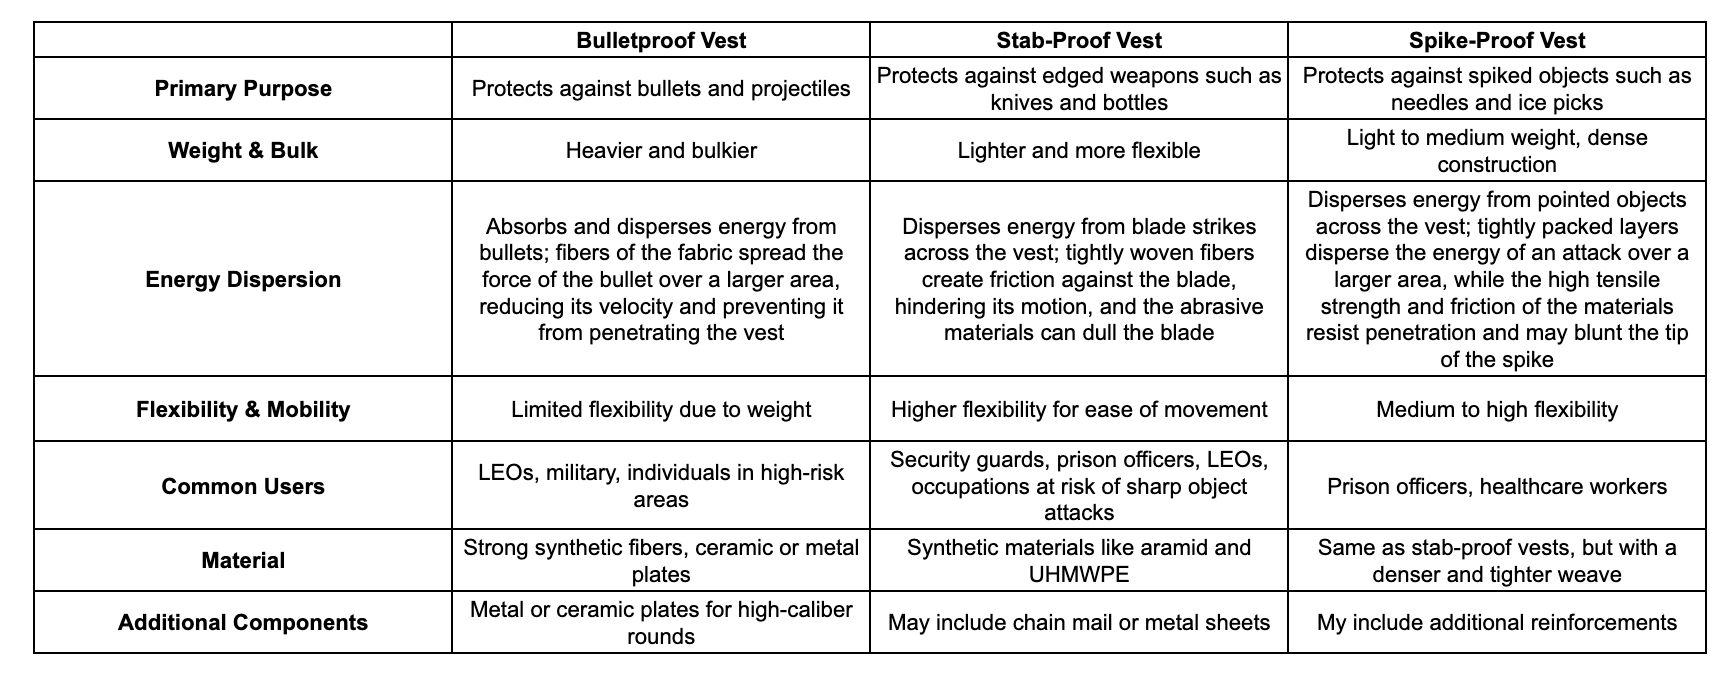 Table comparing bulletproof, stab-proof and spike-proof vests